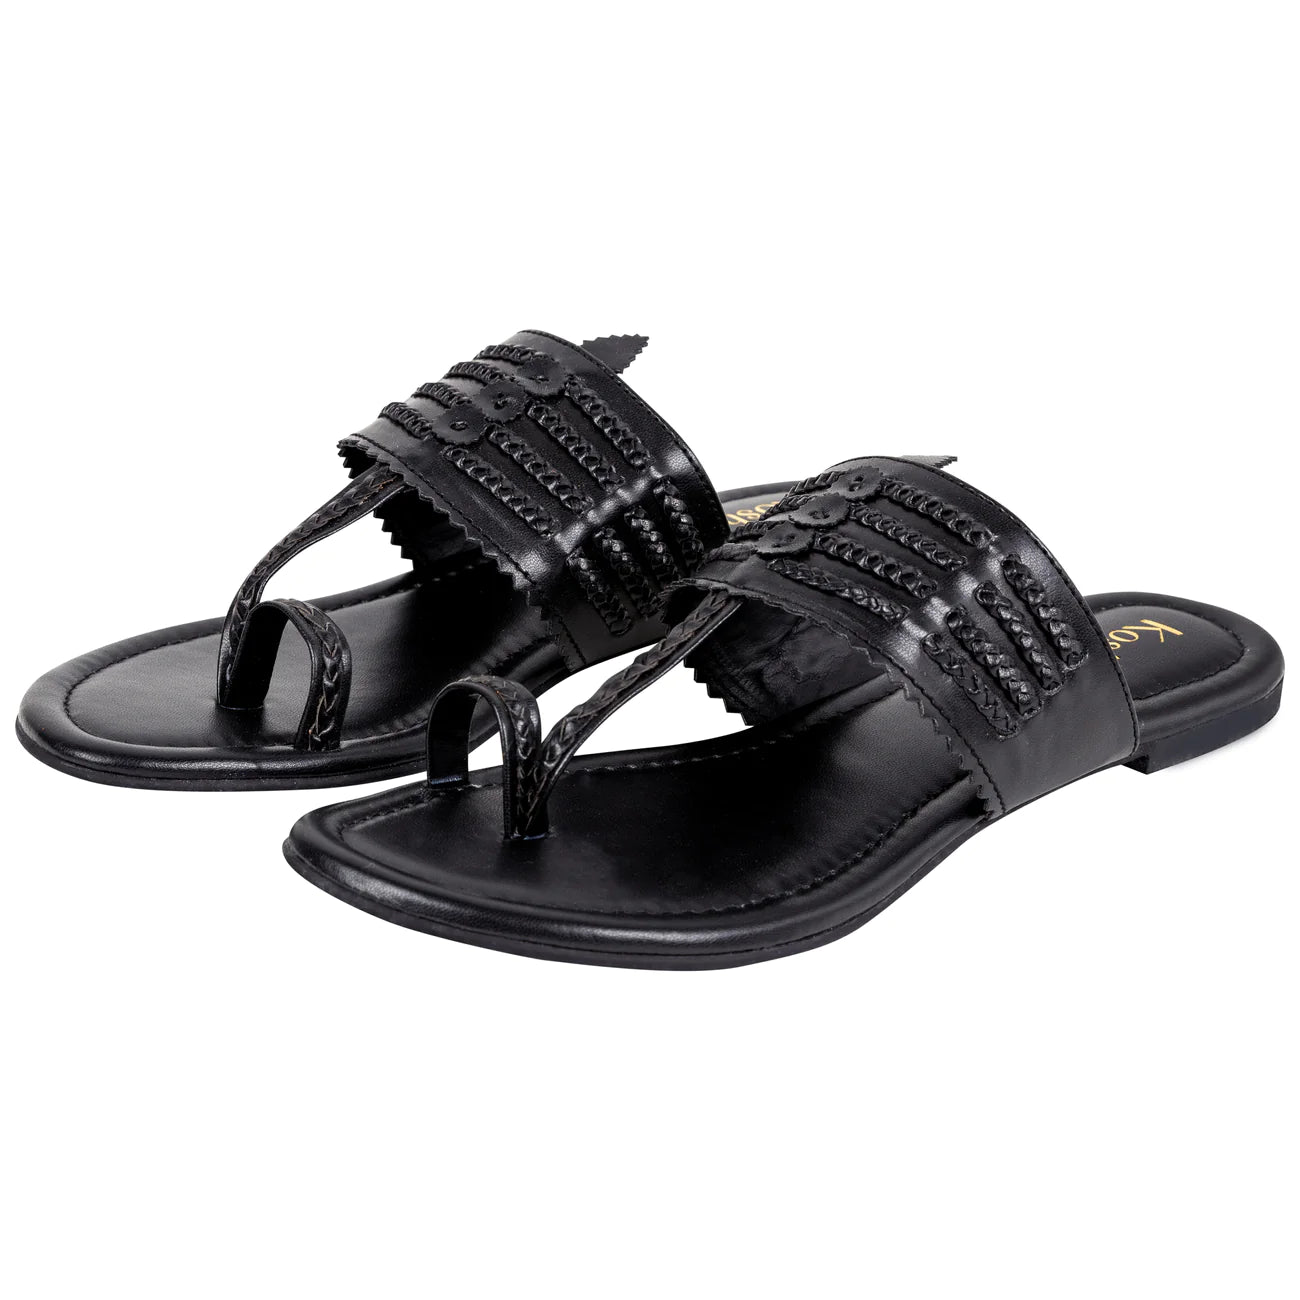 Black Flat Sandals For Women in USA by Kosh-a